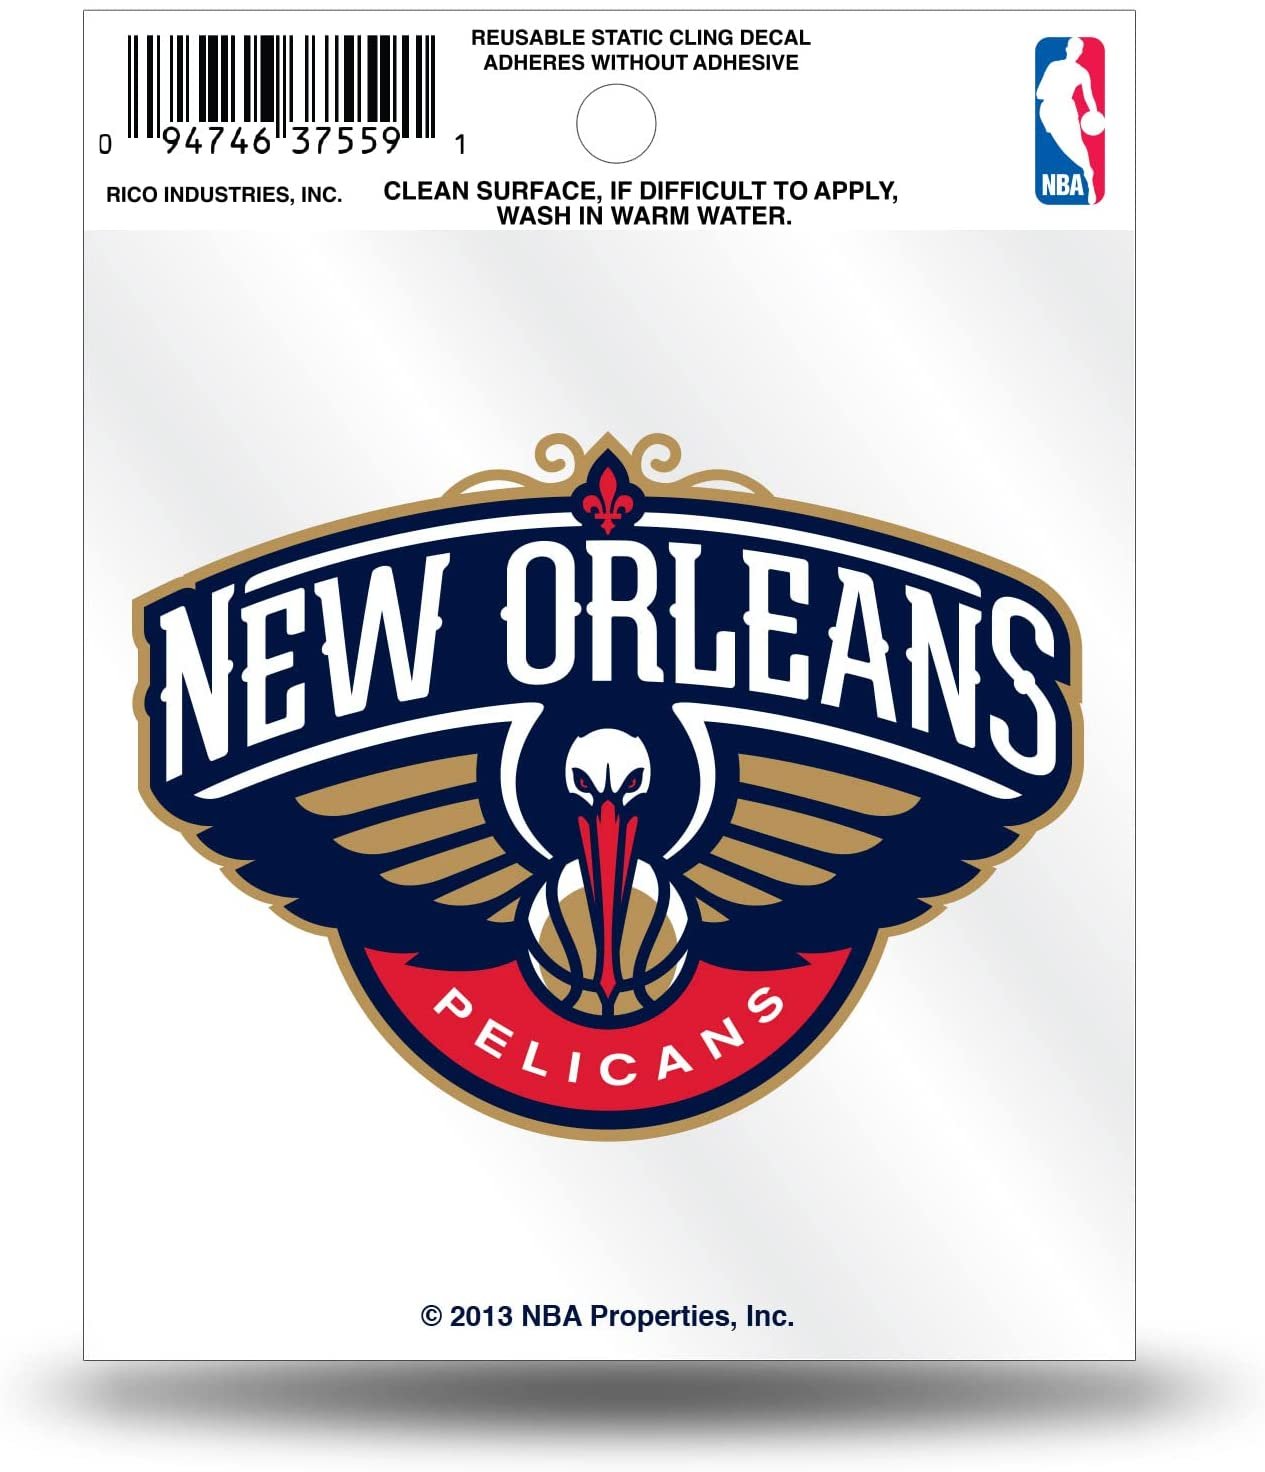 New Orleans Pelicans 3 Inch Static Cling Decal